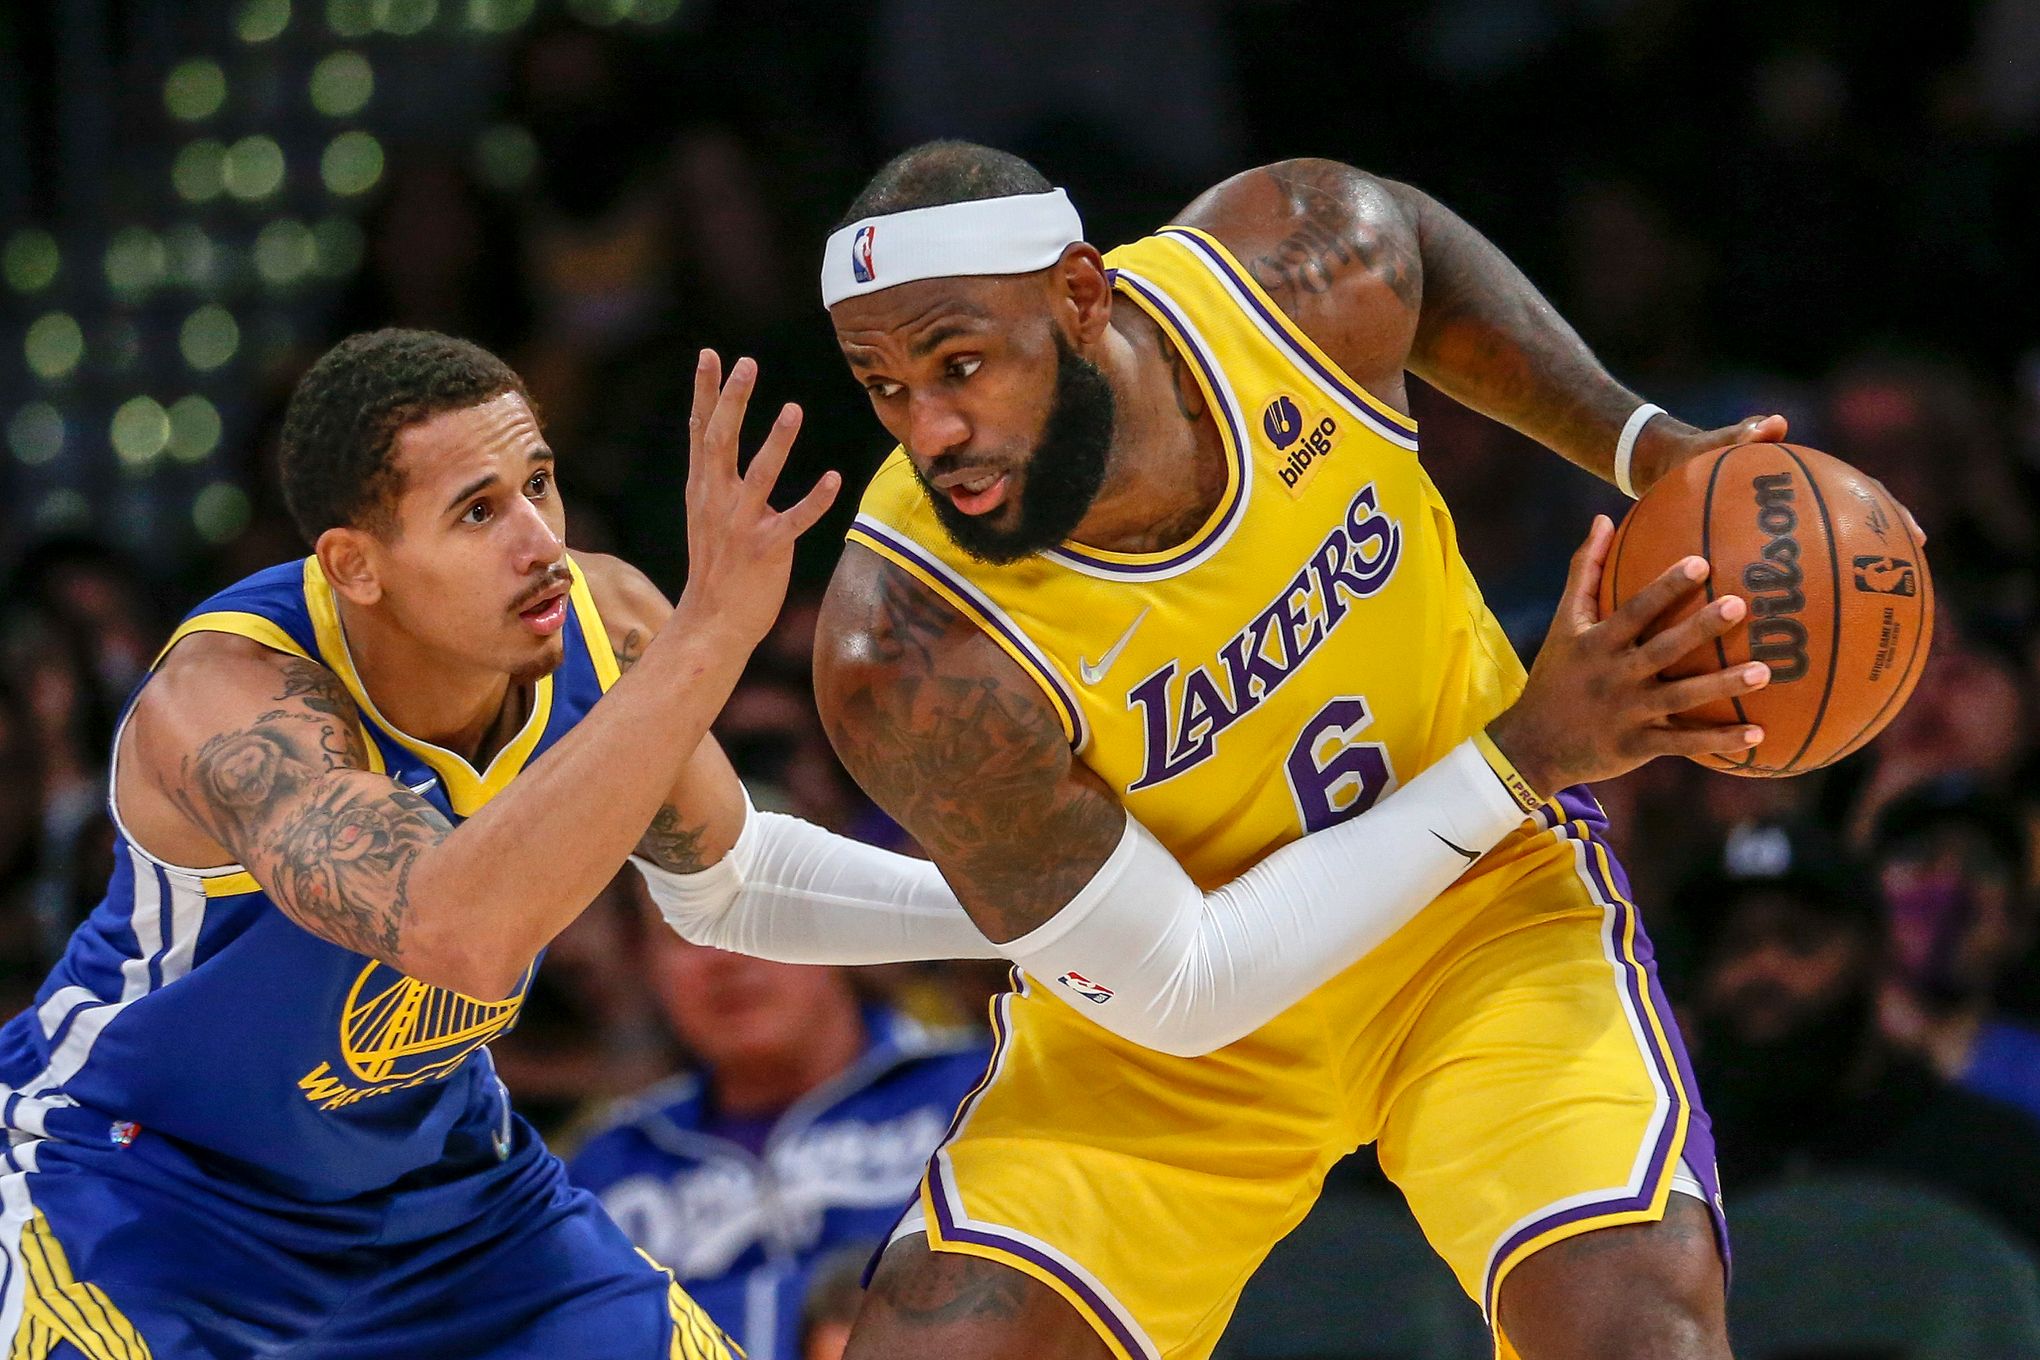 Lakers vs Clippers Prediction, Odds & Best Bet for Nov. 9 (LeBron's Return  Won't Be Enough)